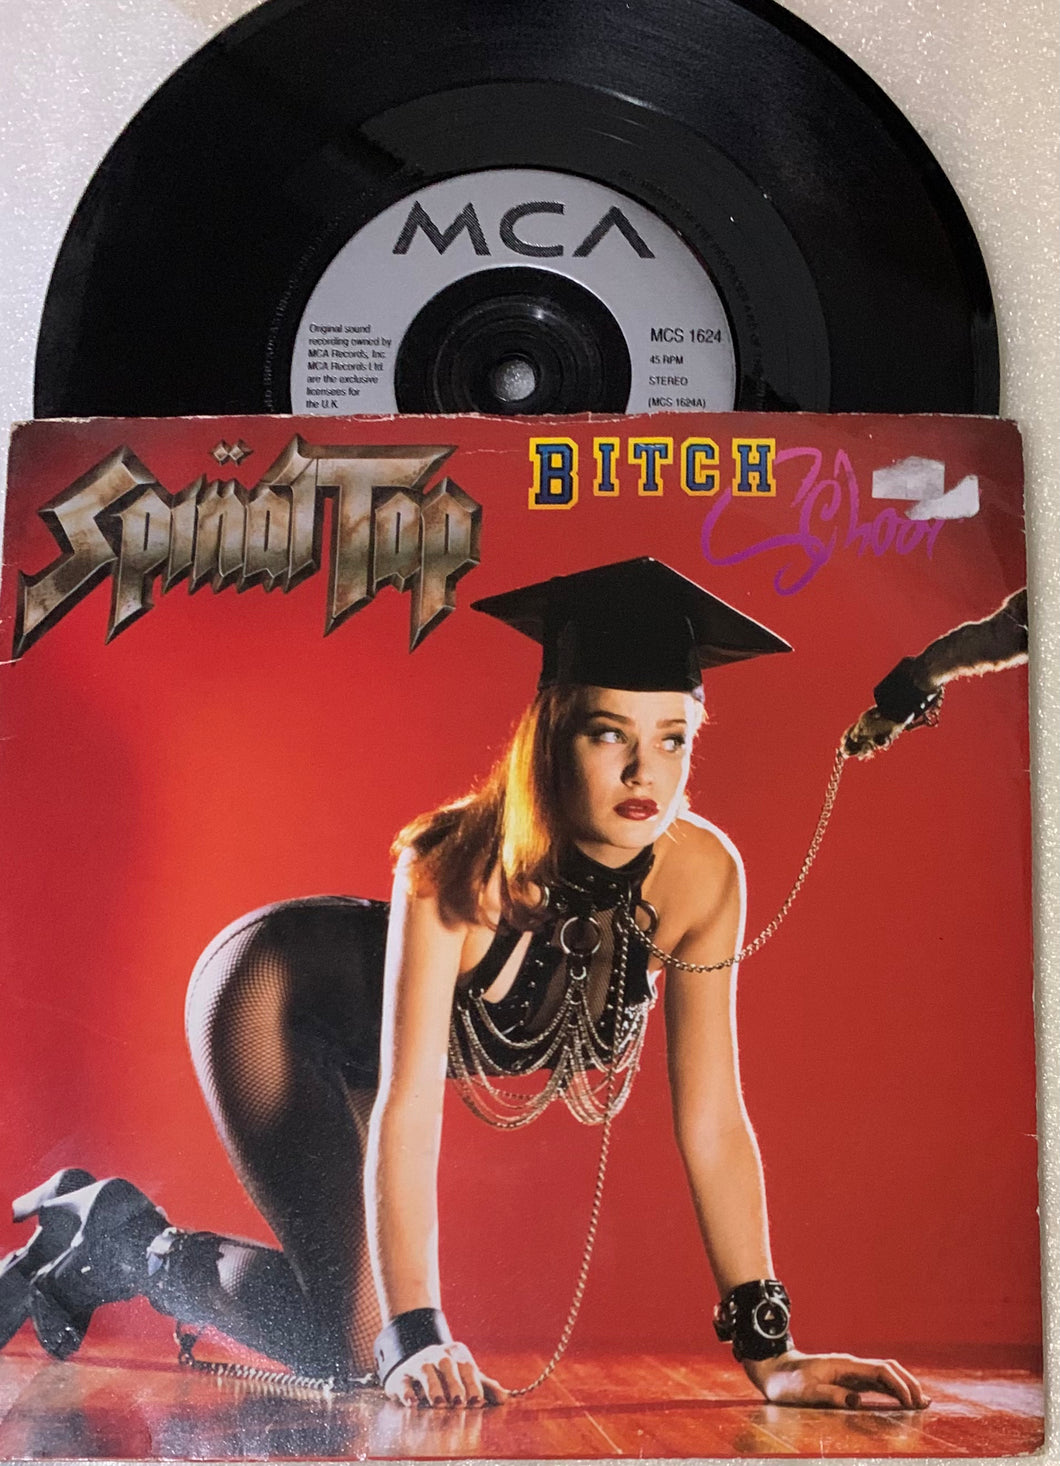 Spinal Tap - Bitch School 7”